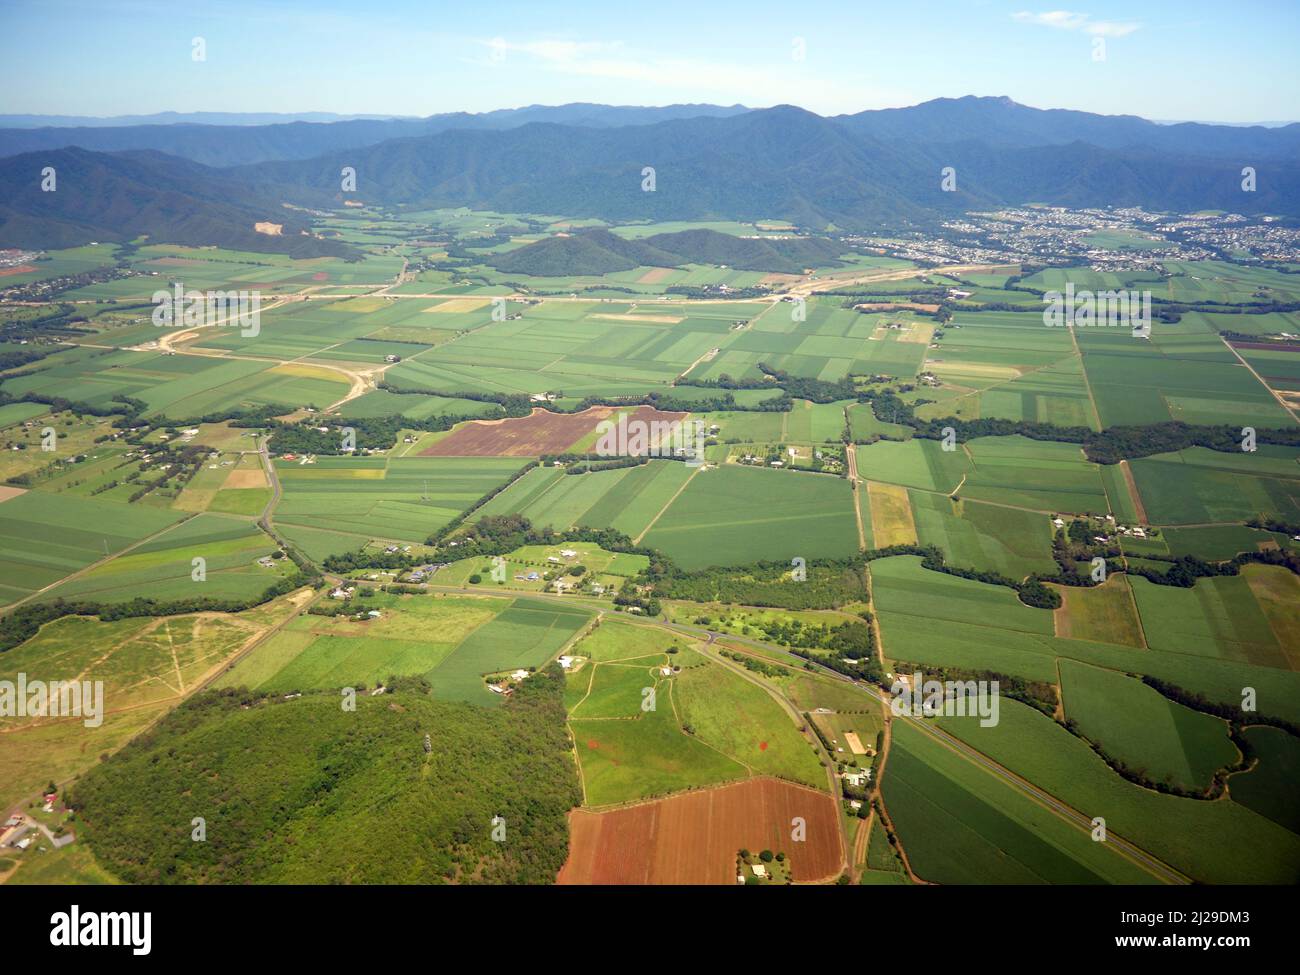 Aerial view of agricultural land uses south of Cairns, Queensland, Australia Stock Photo